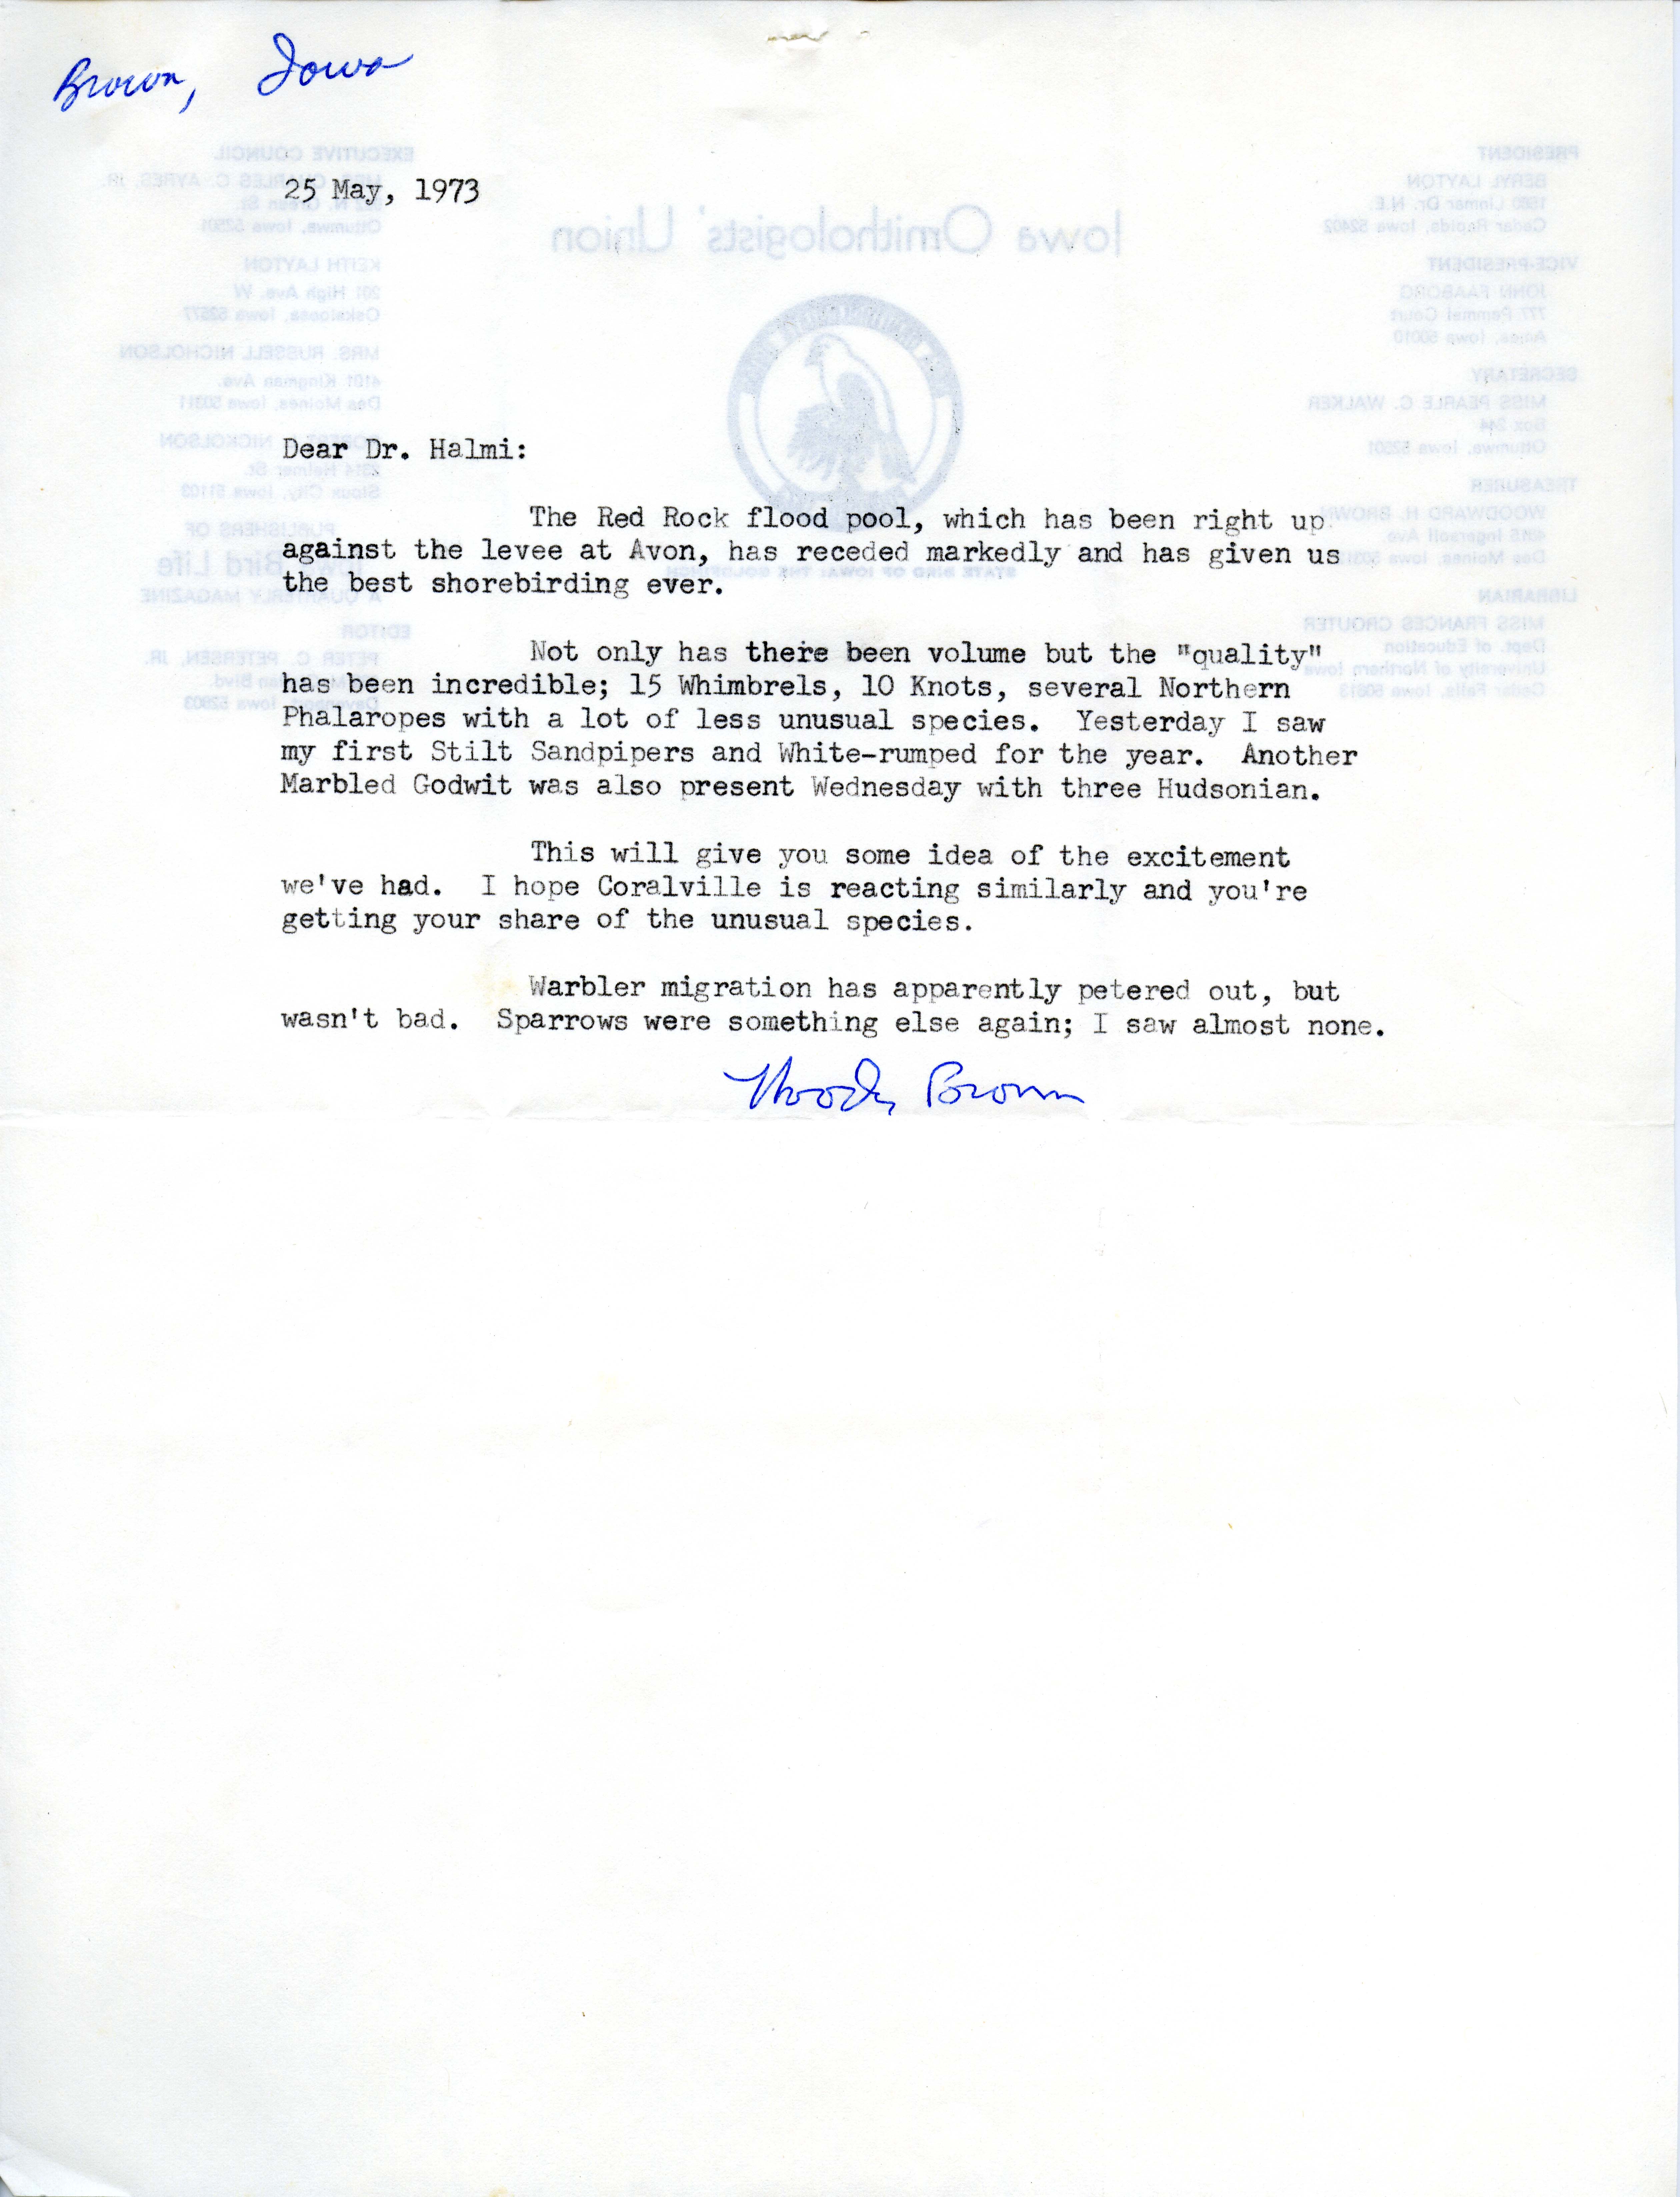 Woodward H. Brown letter to Nicholas S. Halmi regarding shorebirds and others seen after the Red Rock flood pool receded, May 25, 1973